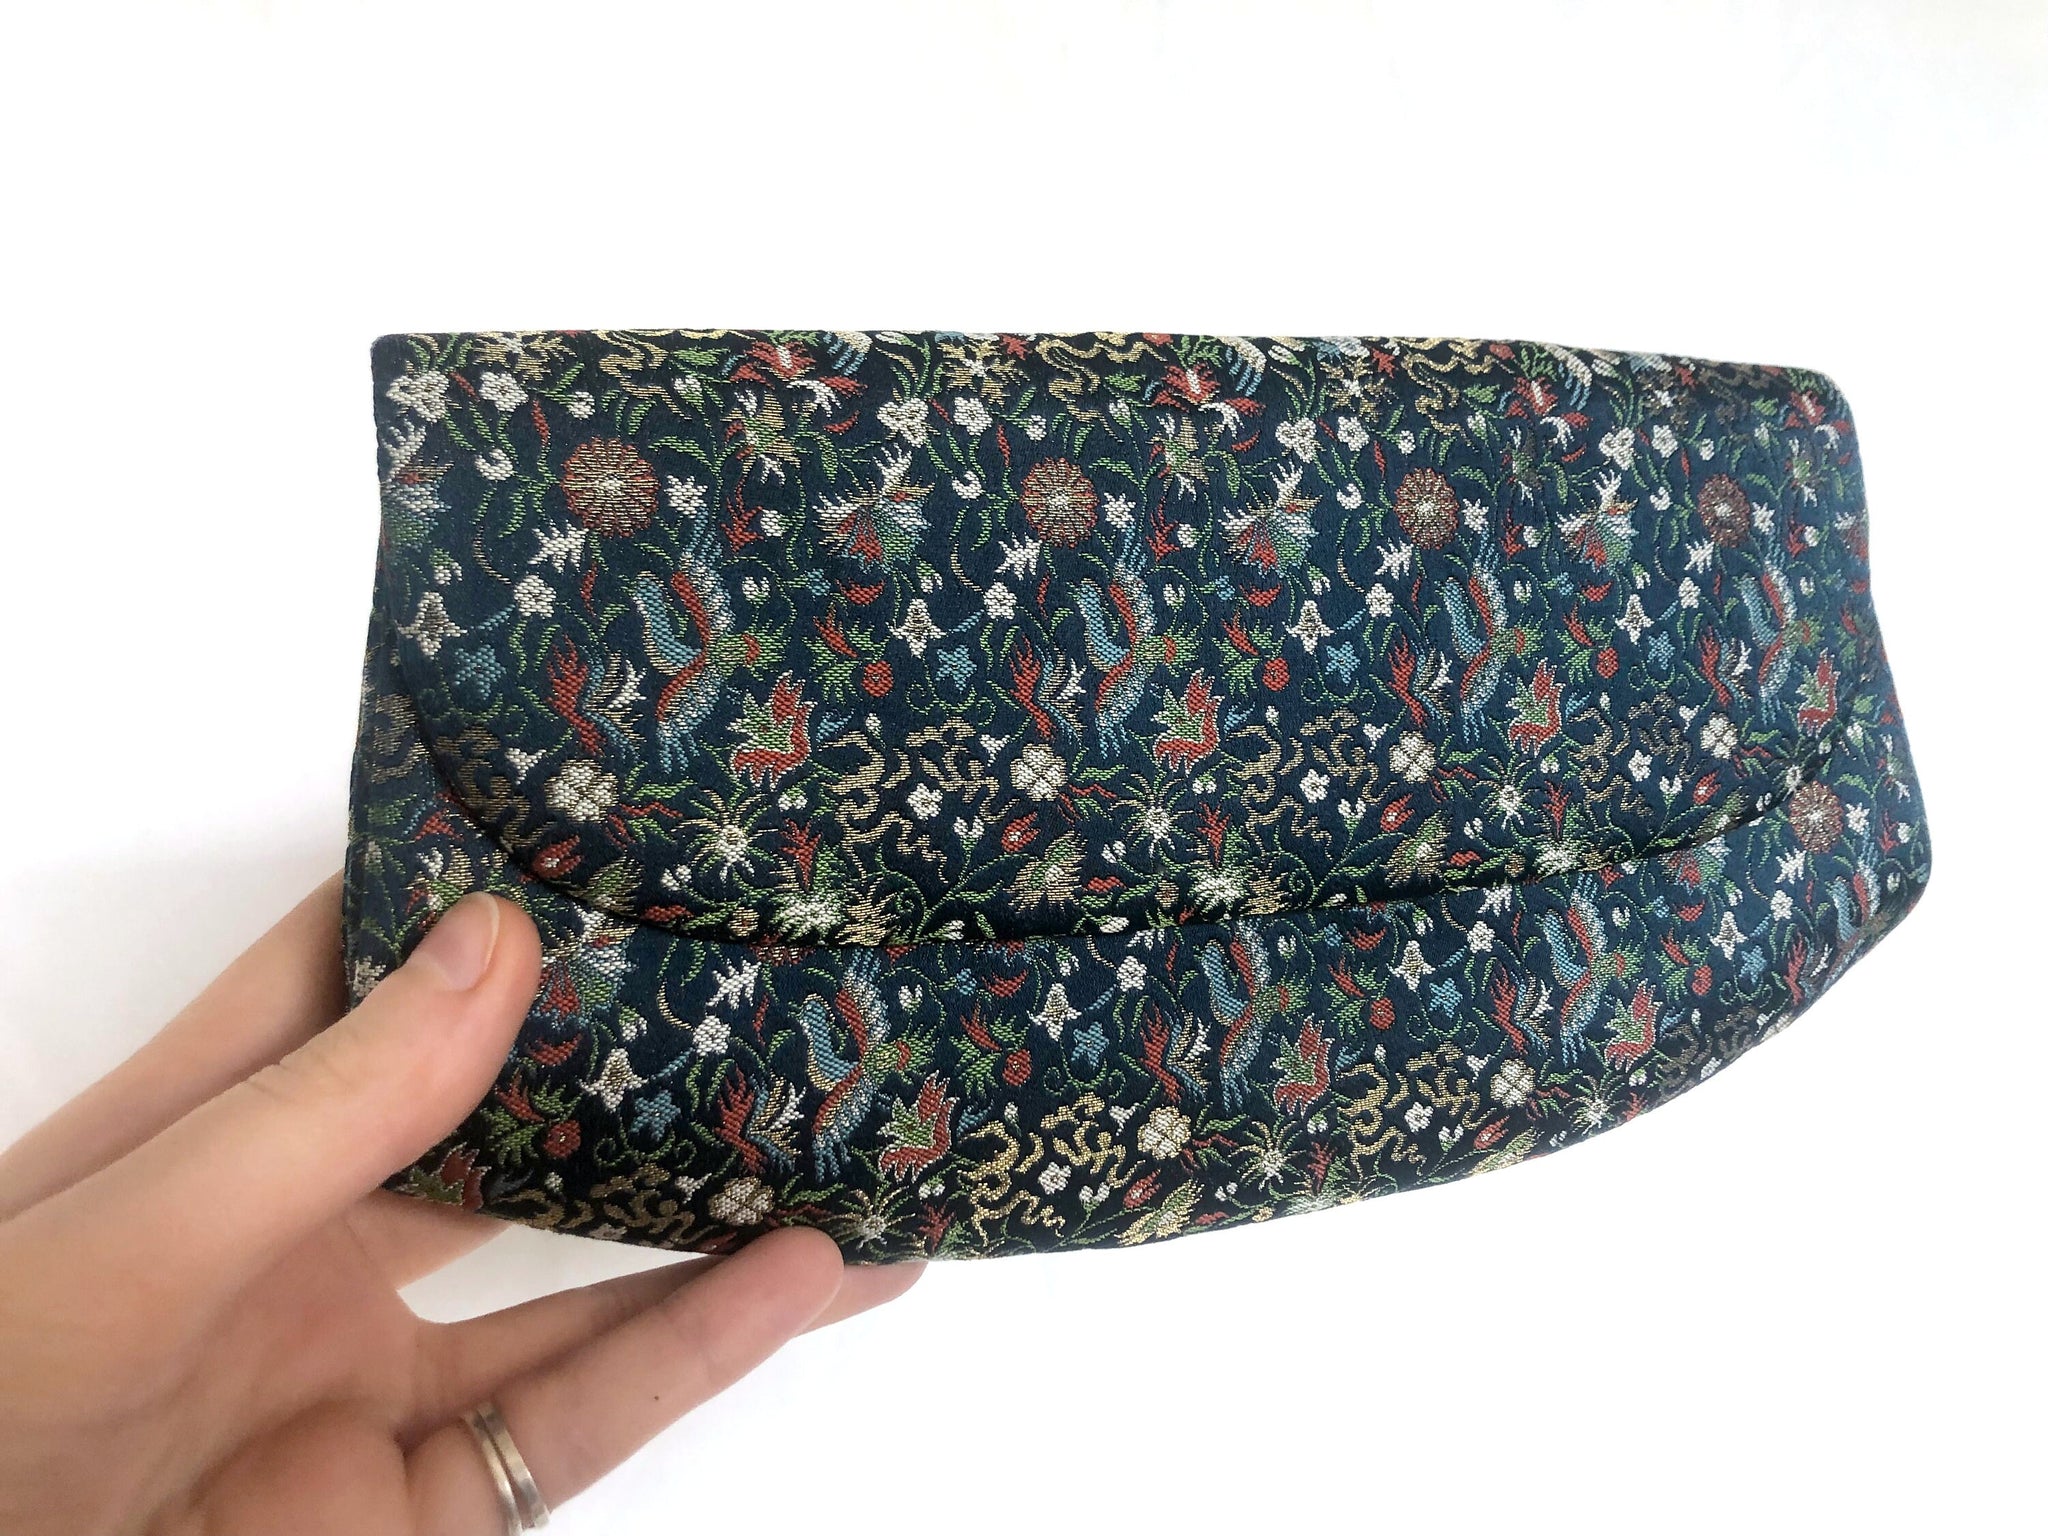 Elegant Japanese pouch bag - deep blue jacquard with colorful florals and phoenixes motifs